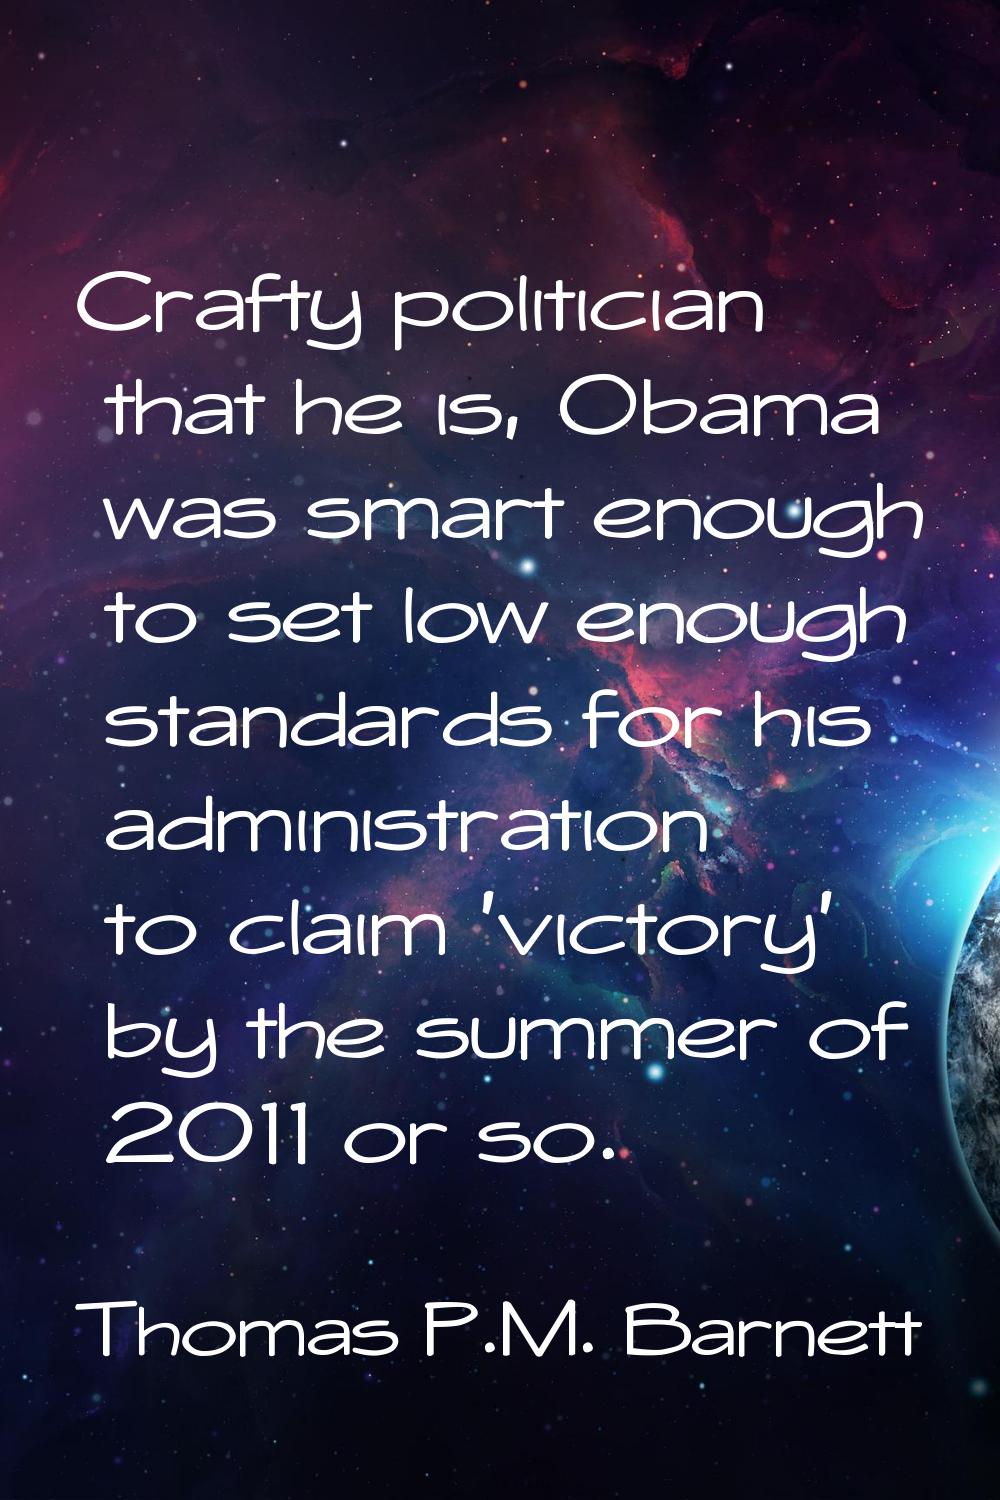 Crafty politician that he is, Obama was smart enough to set low enough standards for his administra